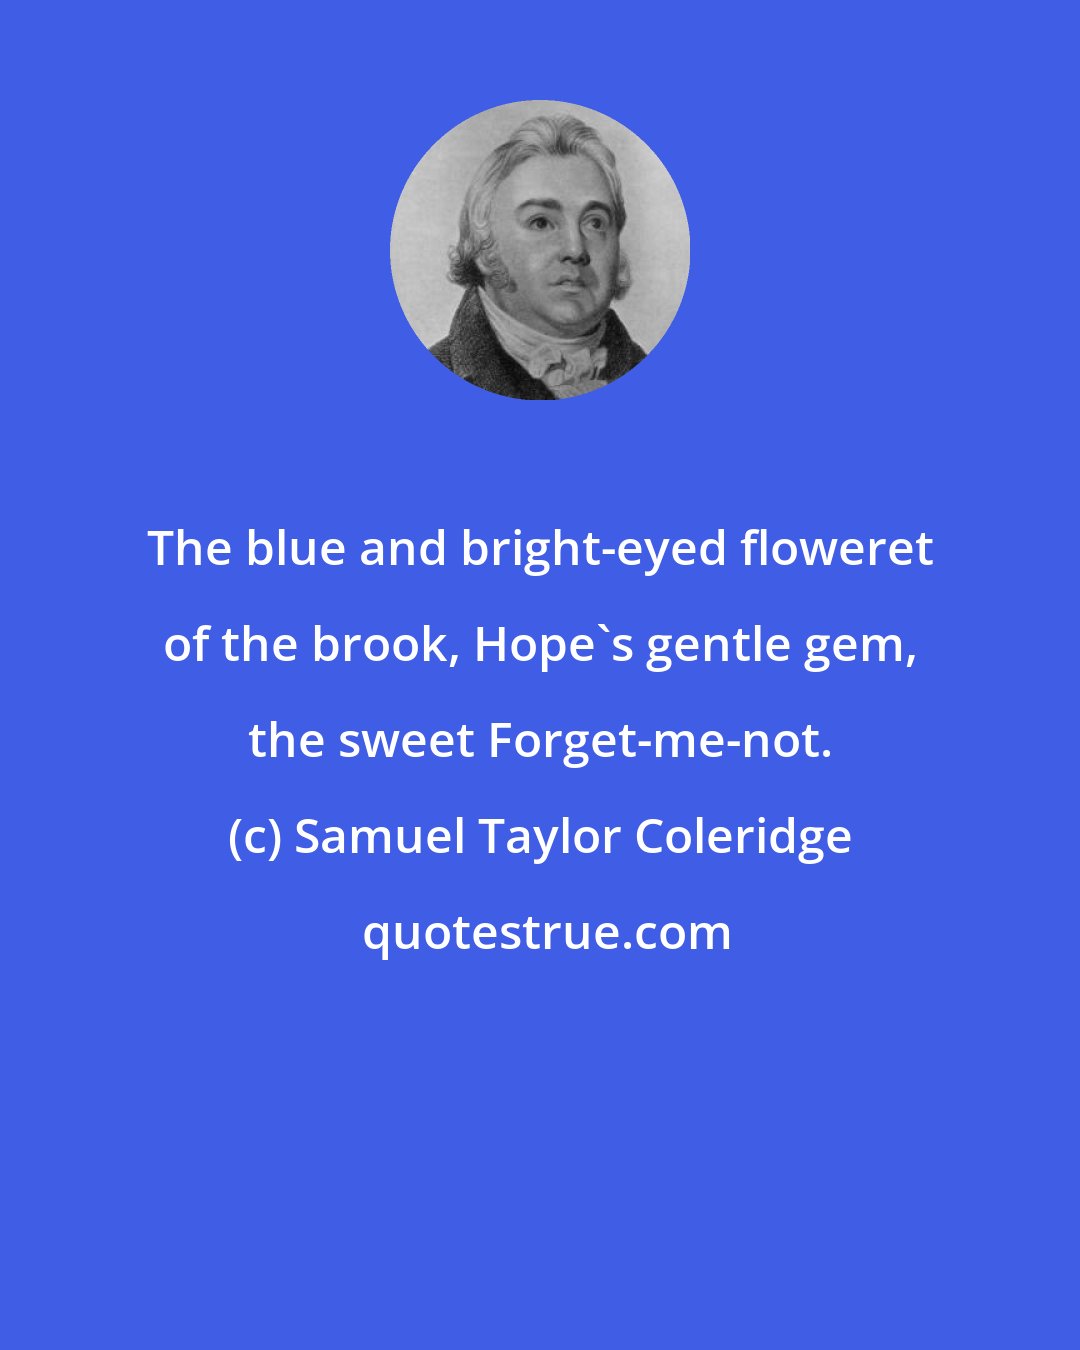 Samuel Taylor Coleridge: The blue and bright-eyed floweret of the brook, Hope's gentle gem, the sweet Forget-me-not.